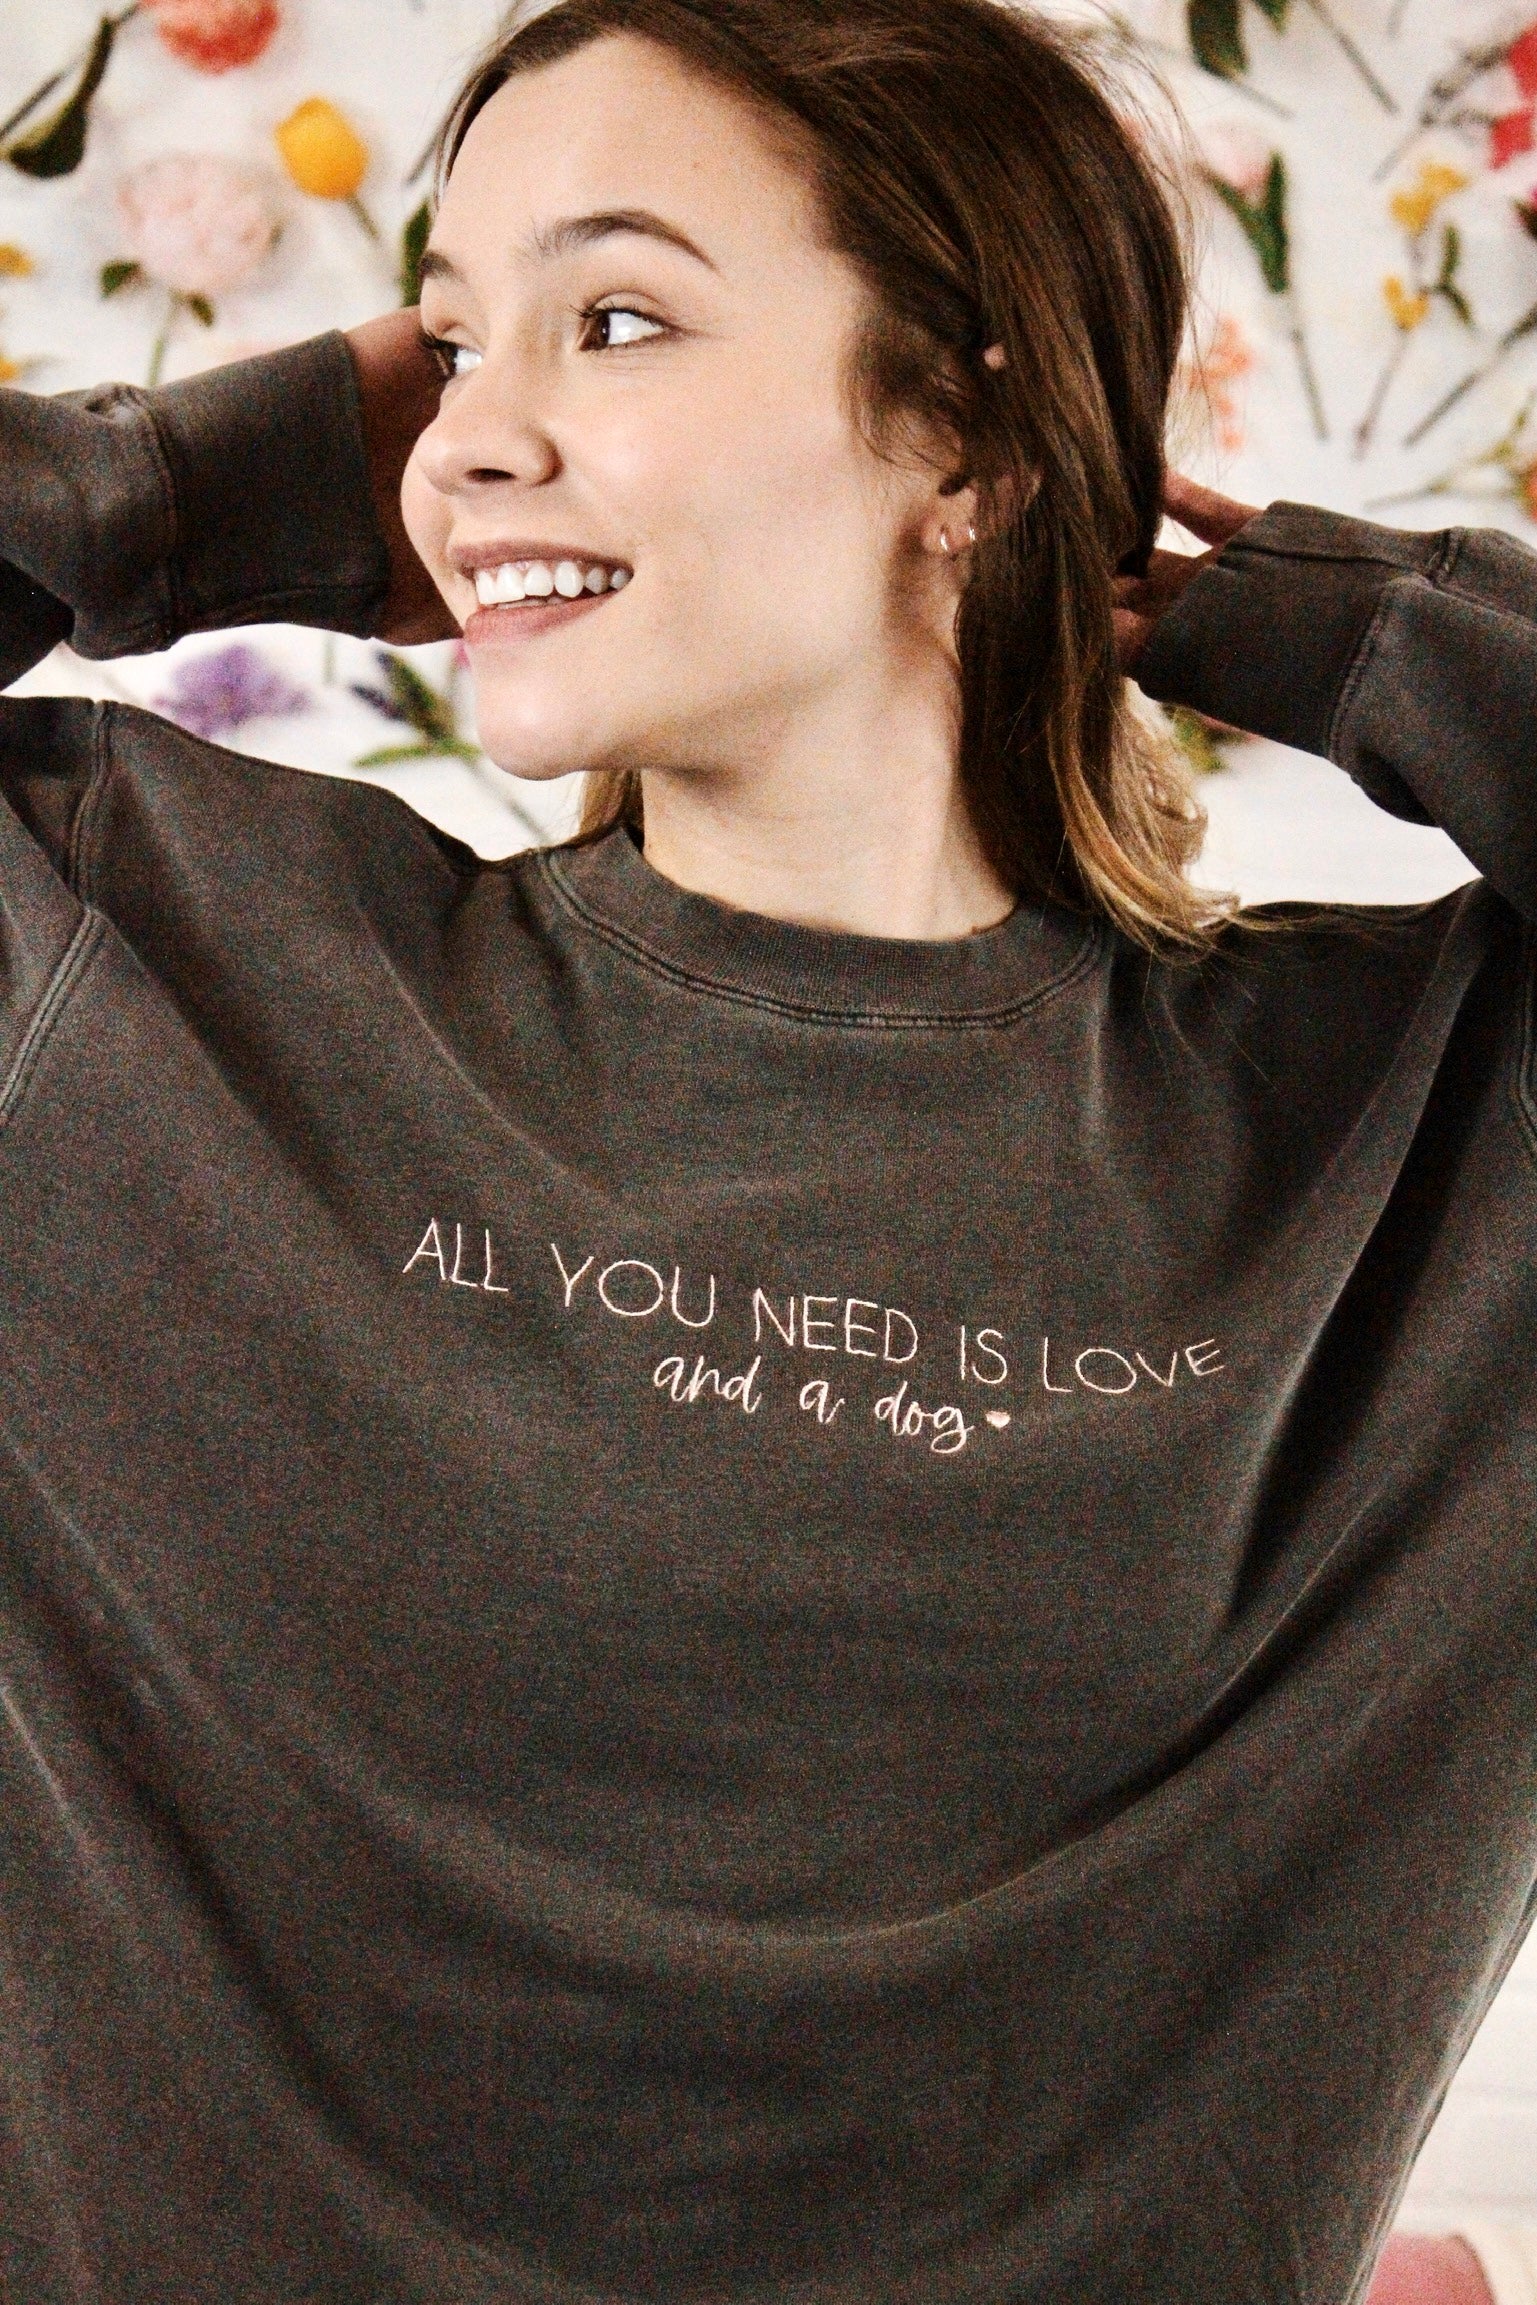 All You Need is Love and a Dog Sweatshirt